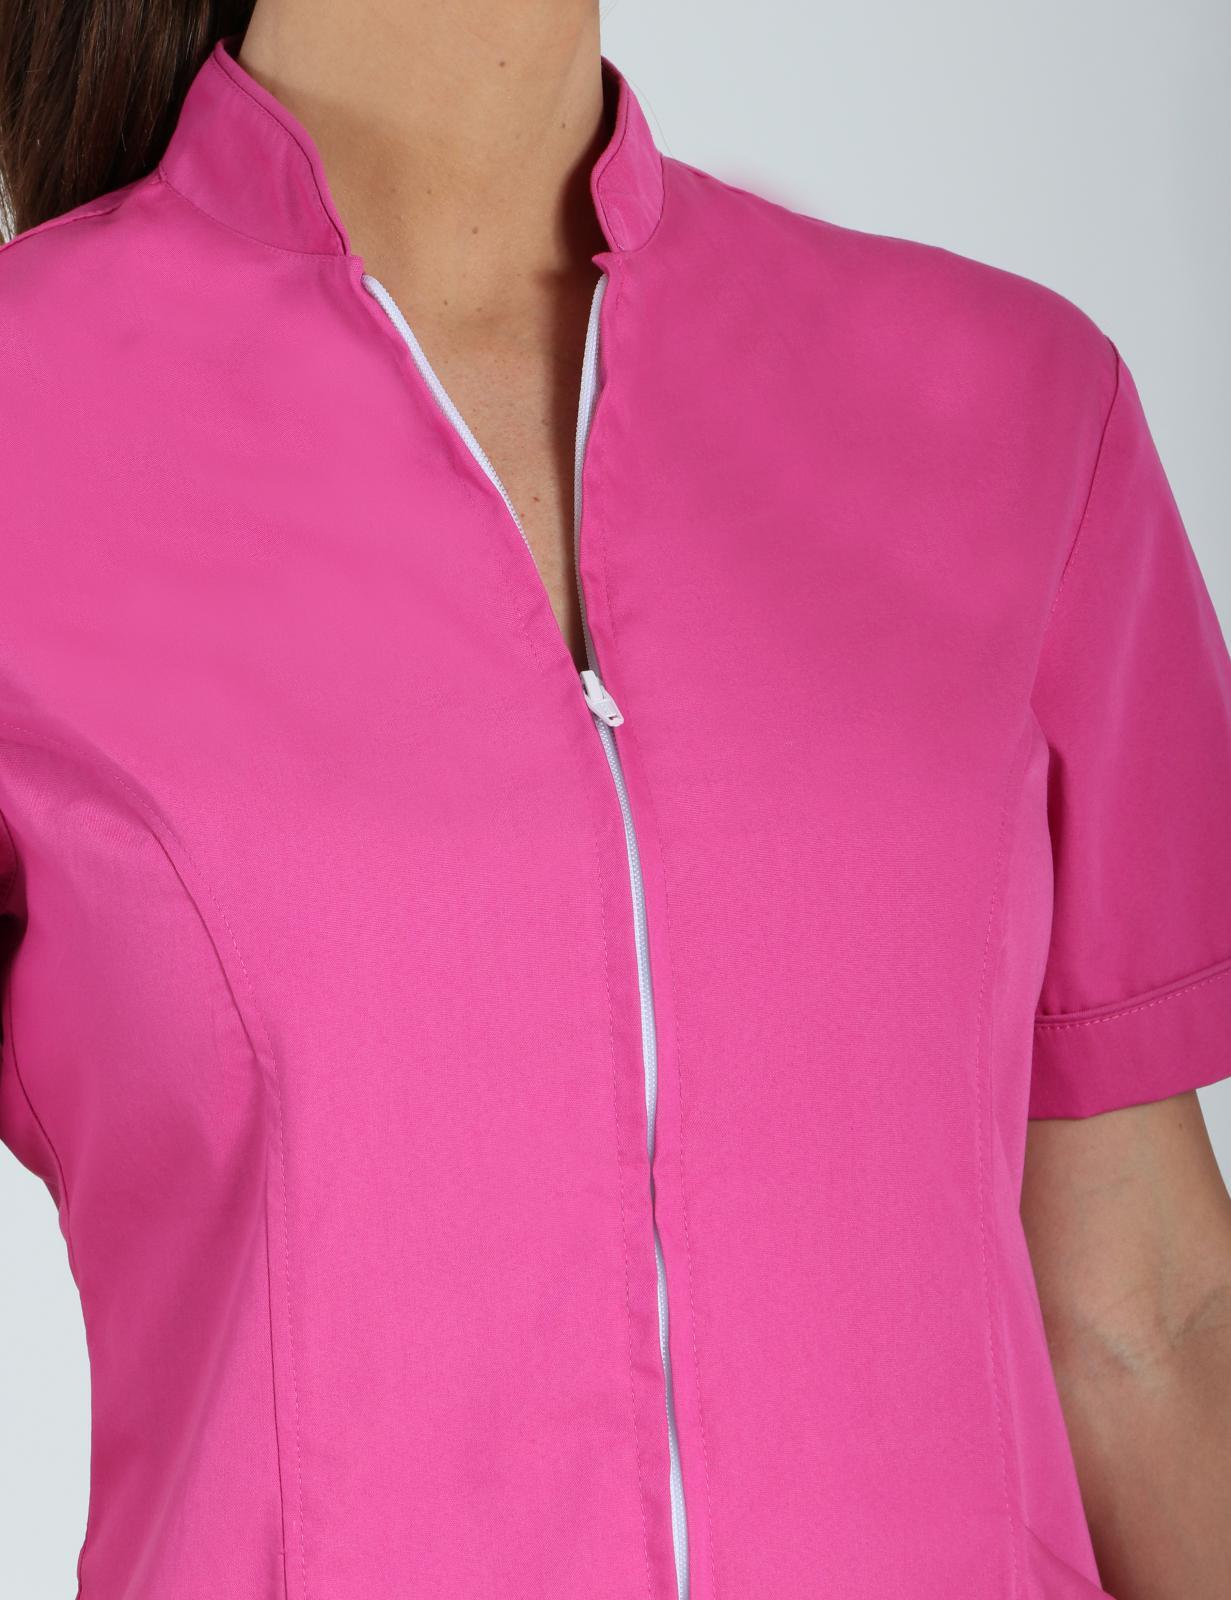 Nellie Style Tunic Top - Pink - 3X Large - 1